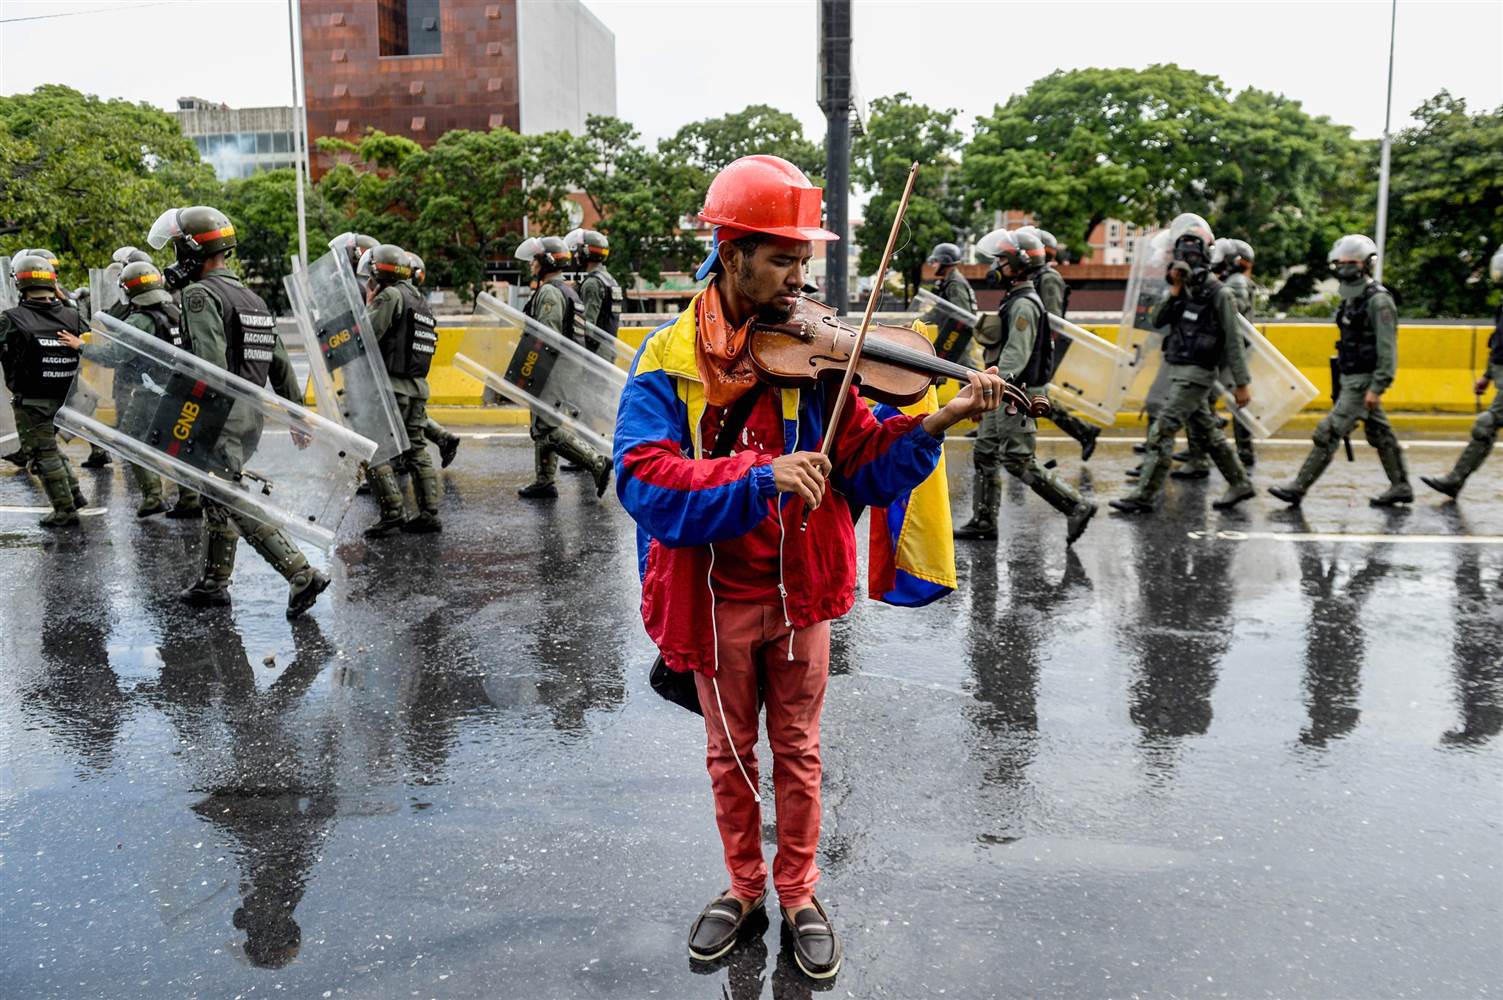 A Venezuelan man plays the violin as security forces march past